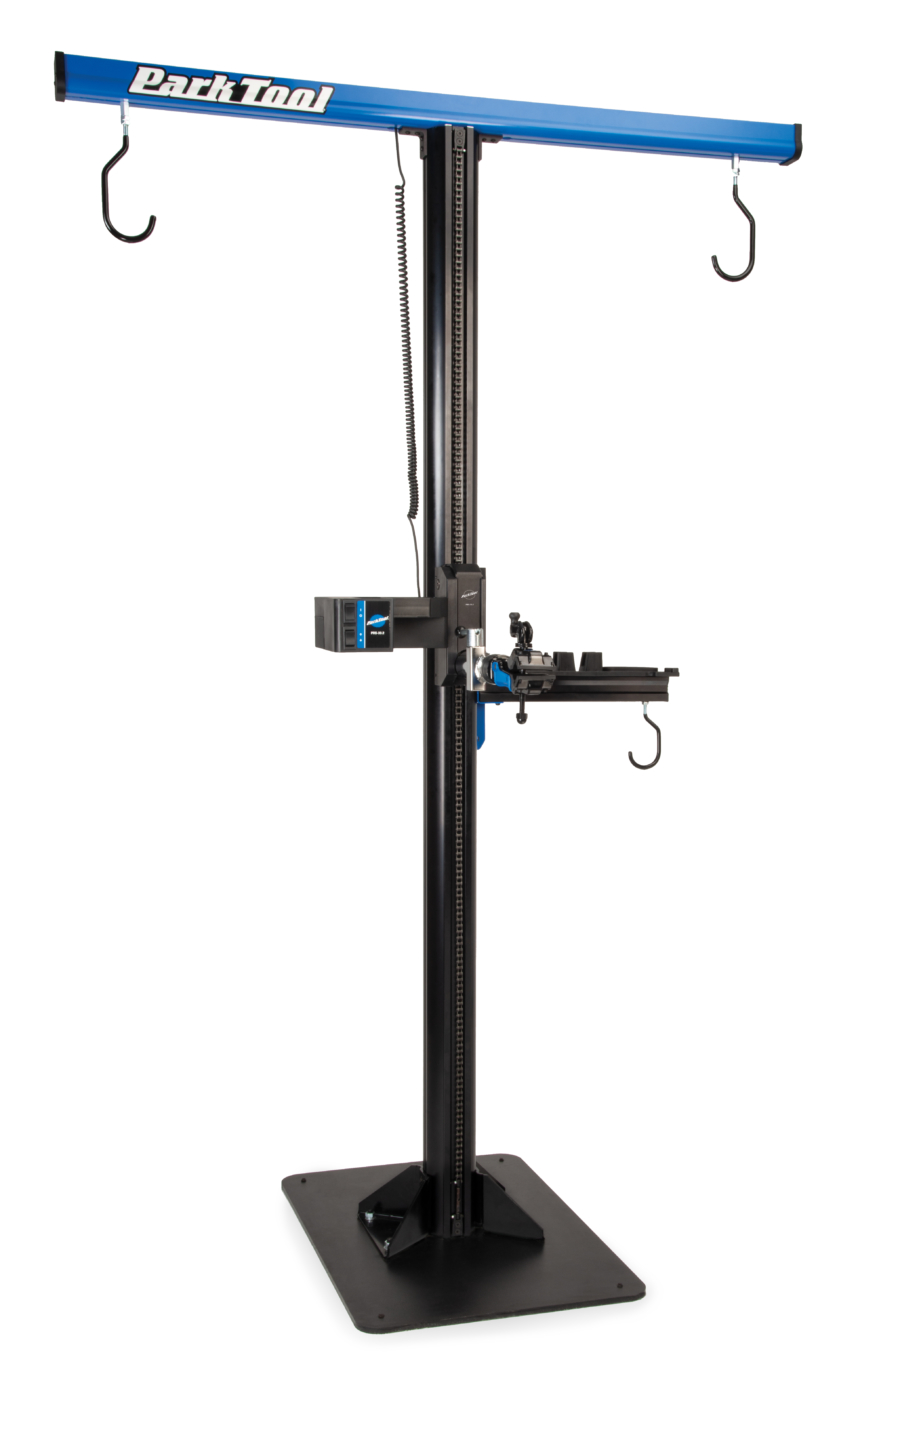 Park Tool PRS-33.2 Power Lift Shop Stand shown with optional 135-33 base, enlarged